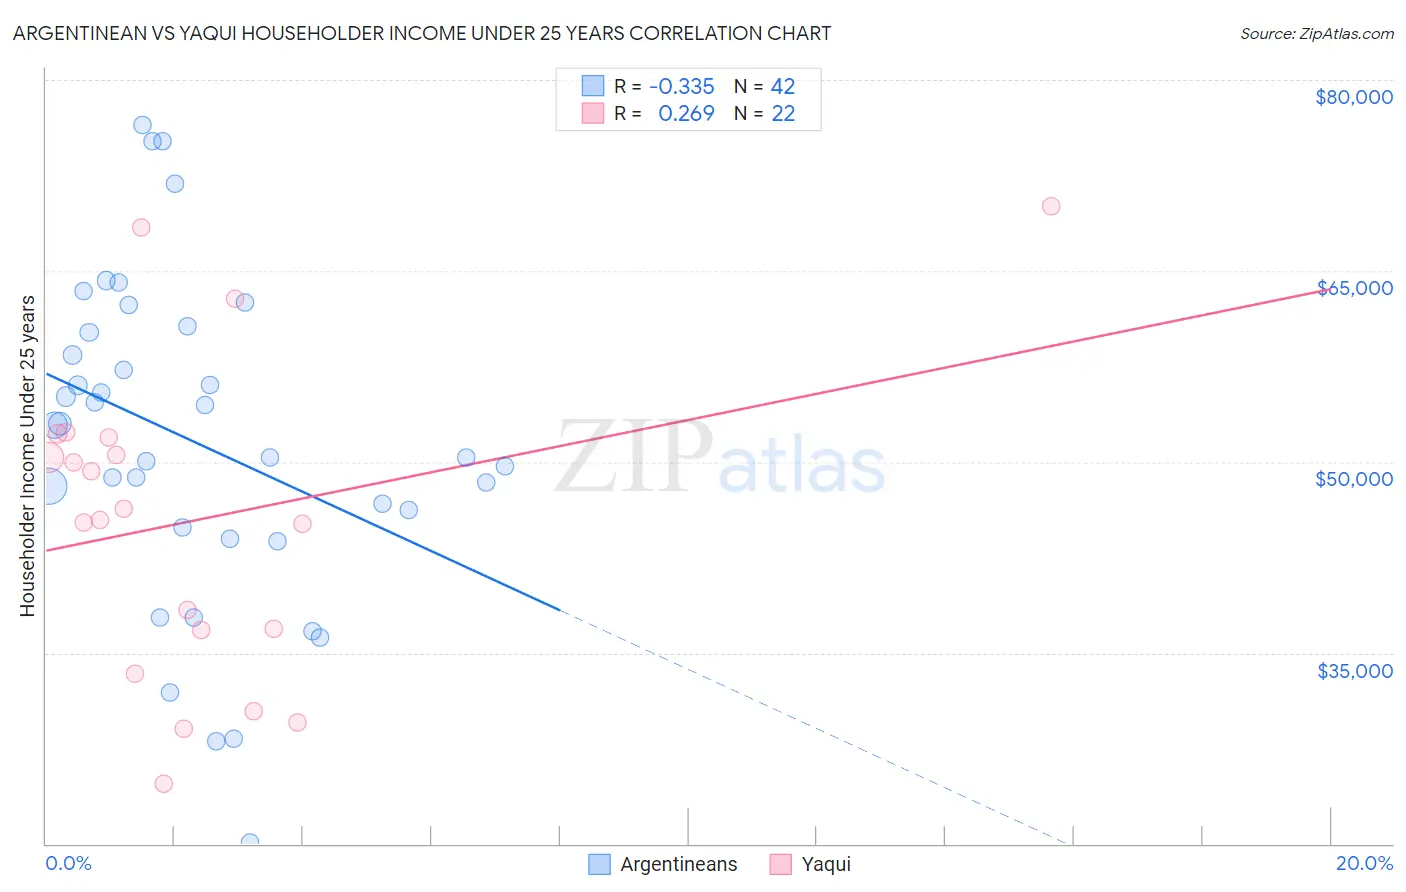 Argentinean vs Yaqui Householder Income Under 25 years